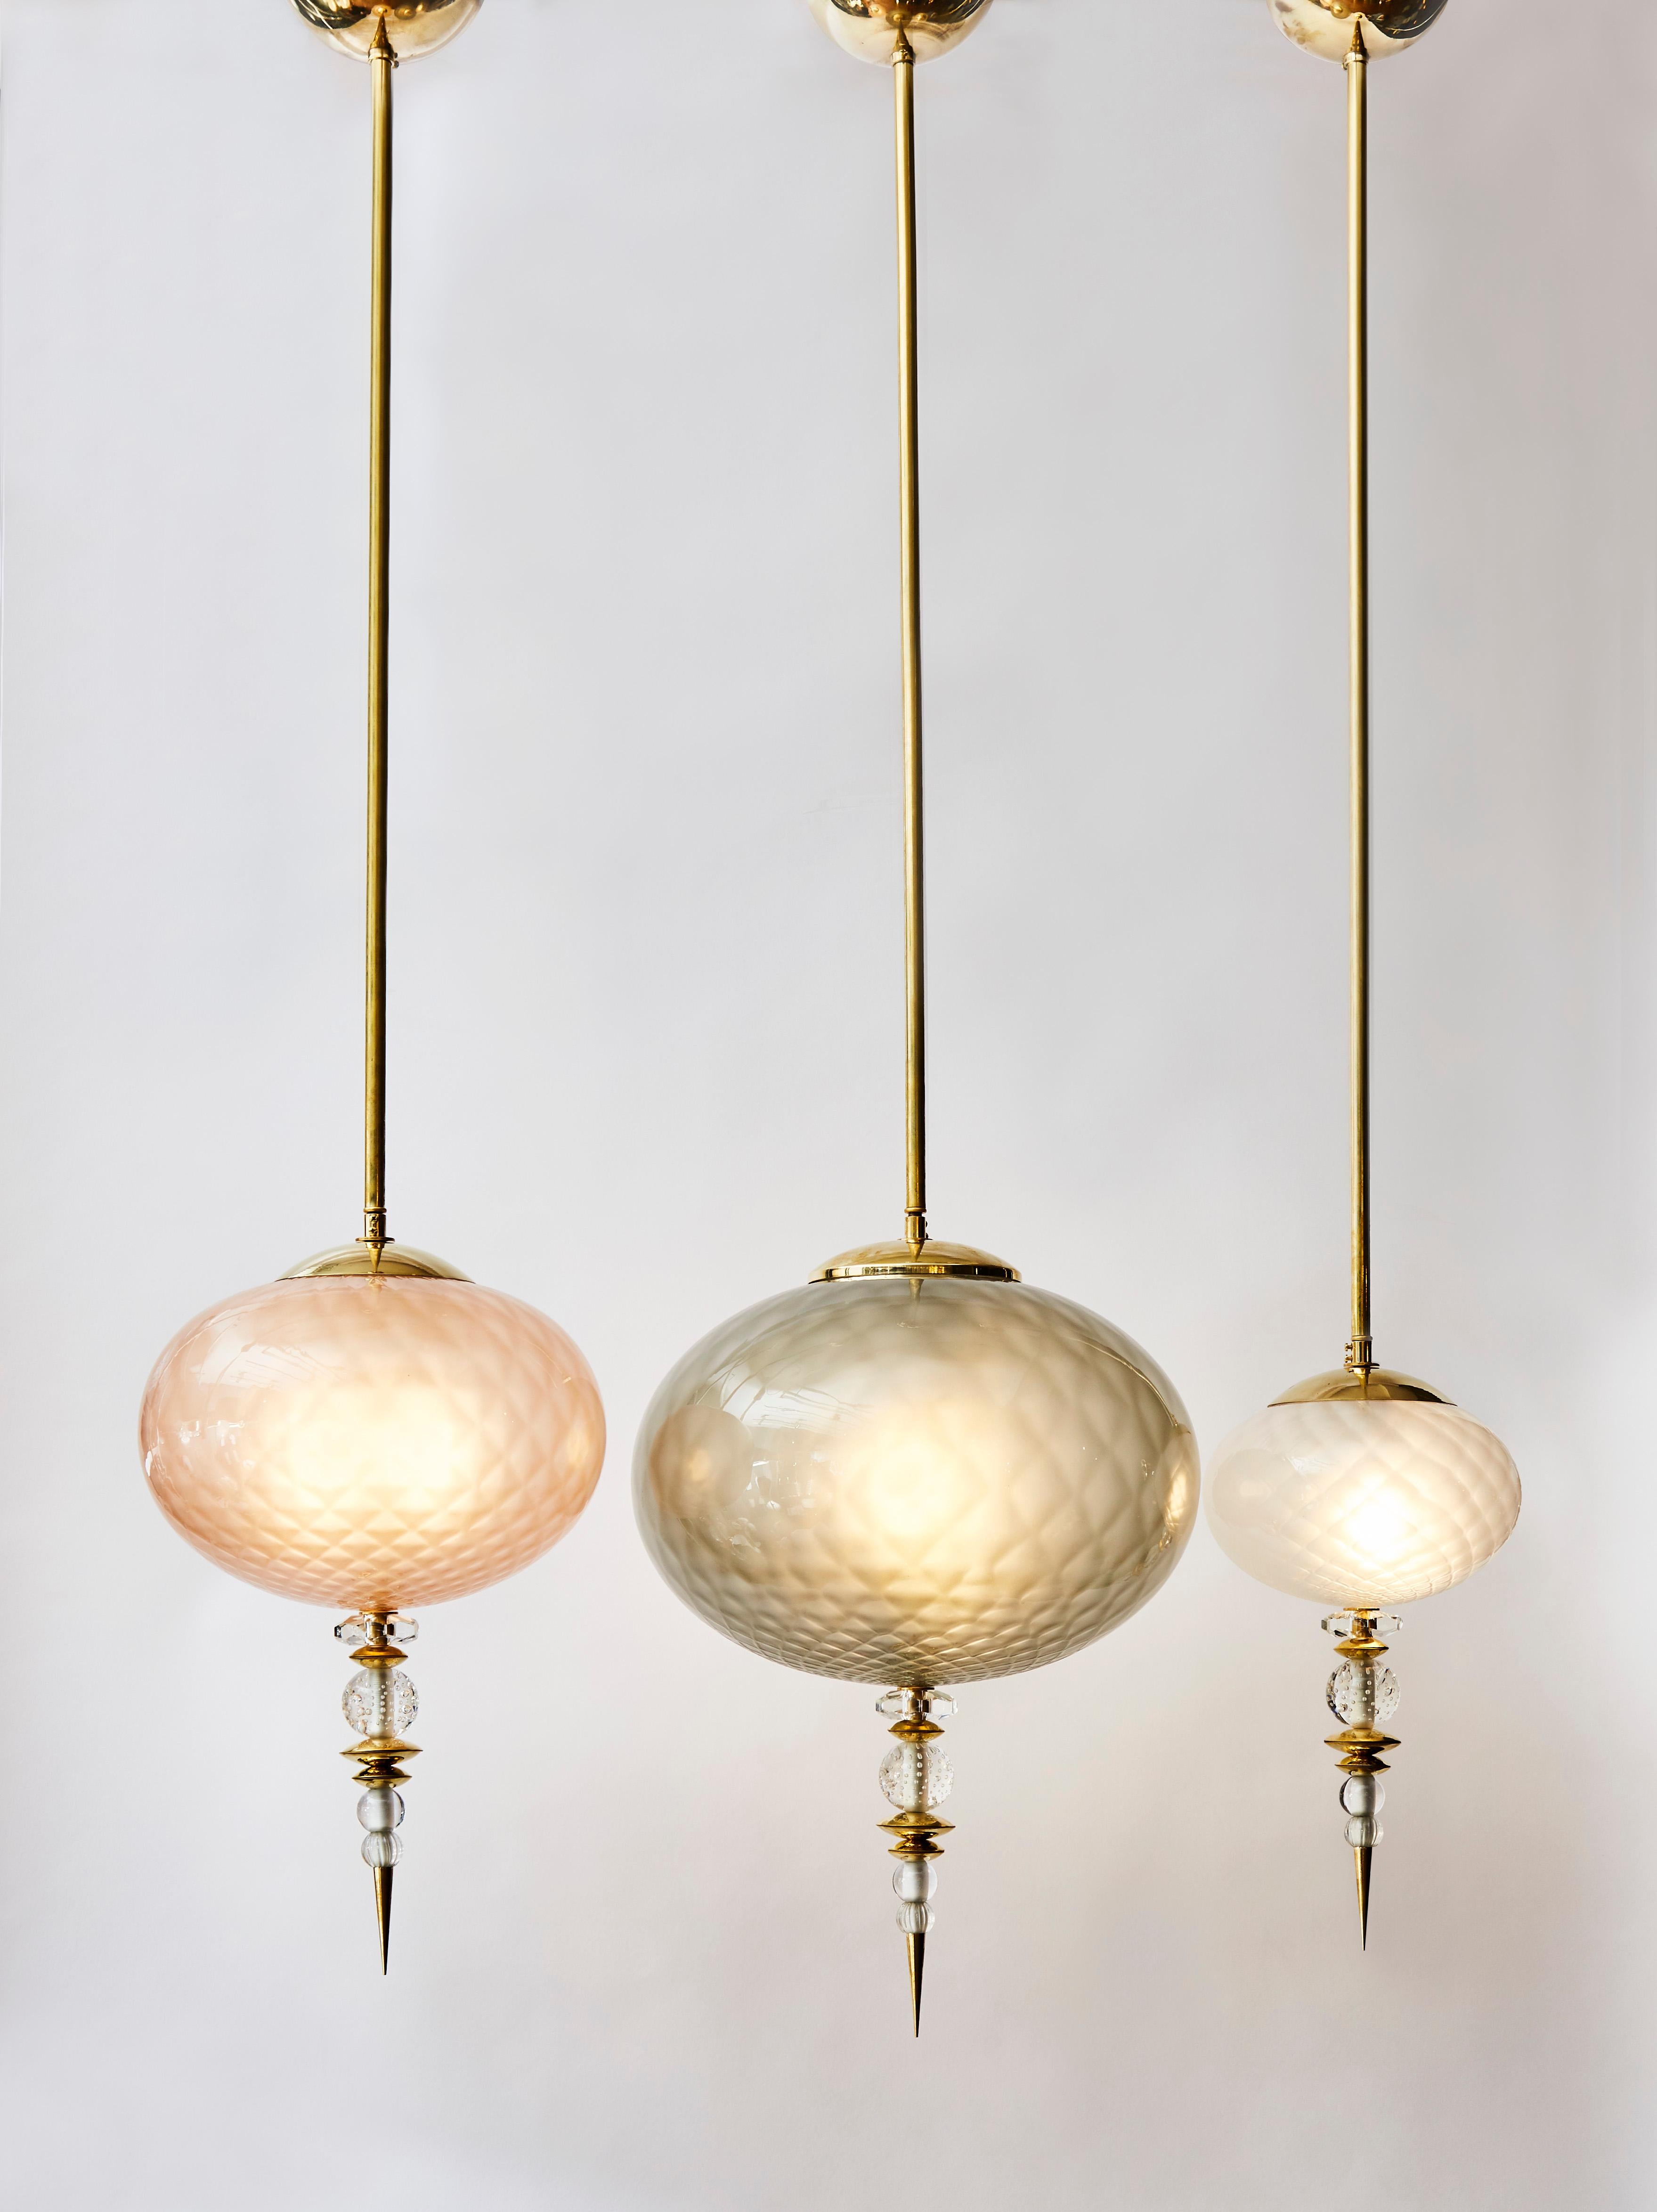 Set of three charming suspensions made of brass structures and different colored Murano glass globes.